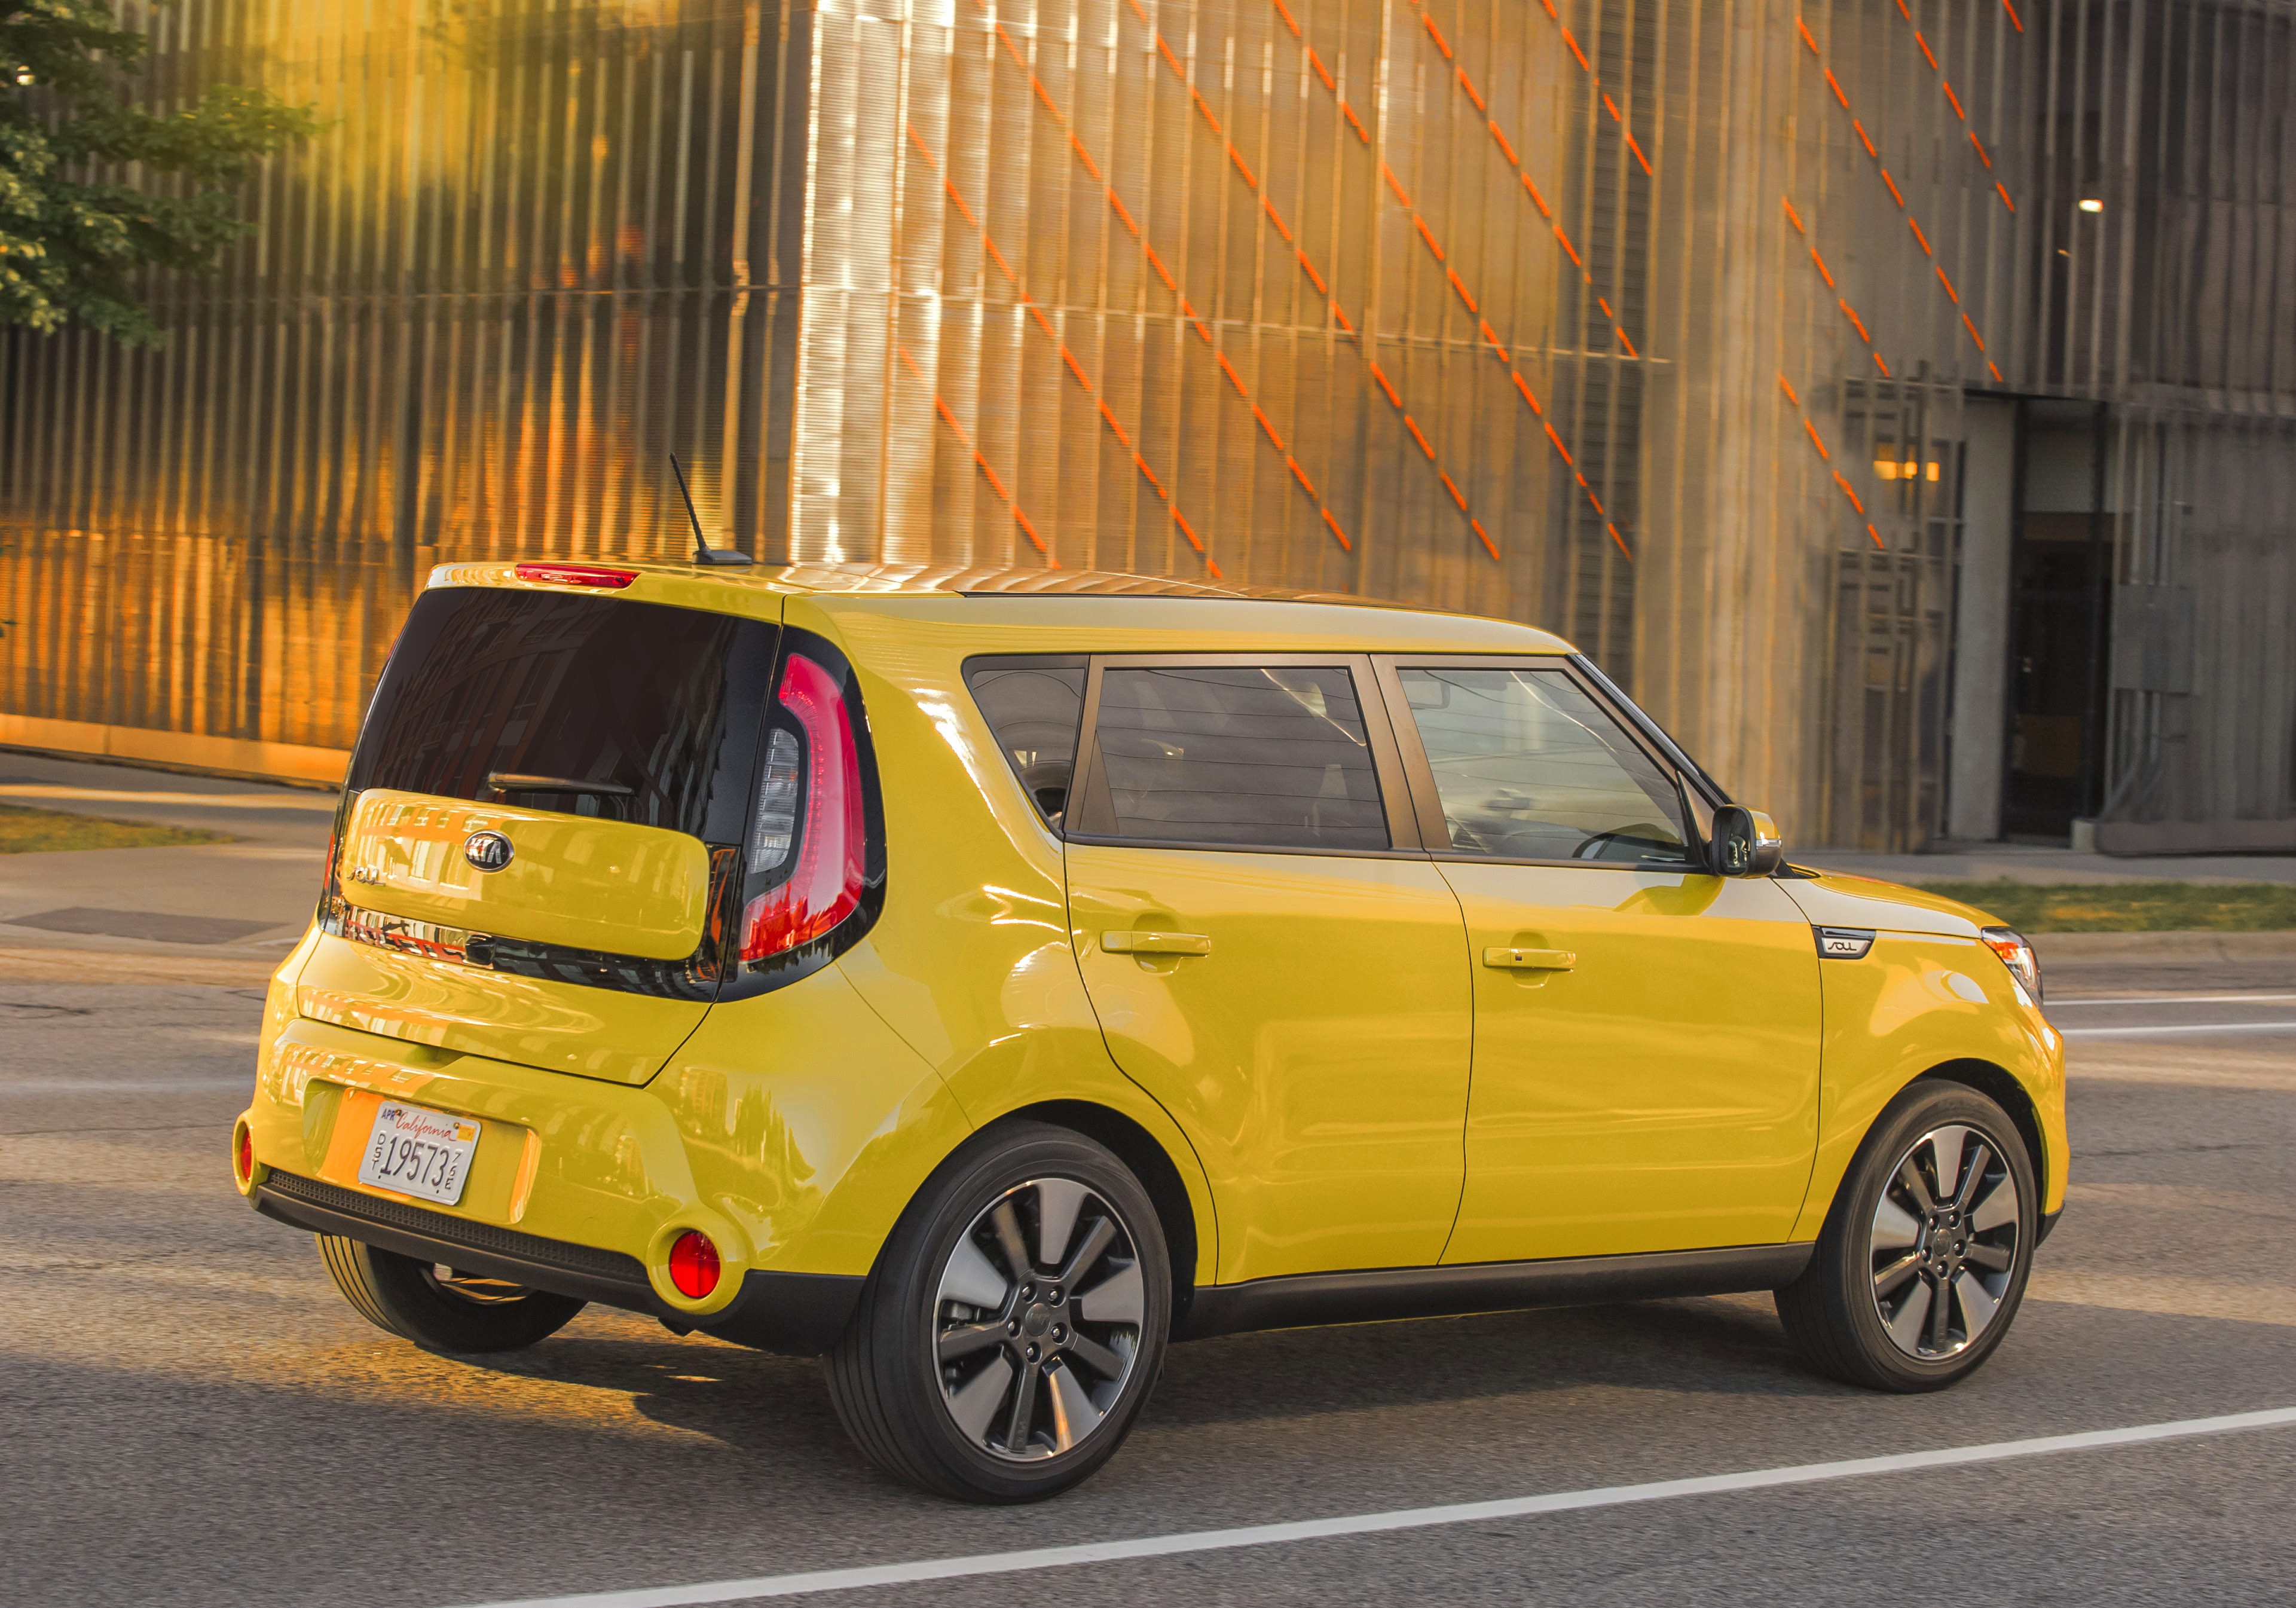 2016 Kia Soul Prices, Reviews, and Photos - MotorTrend